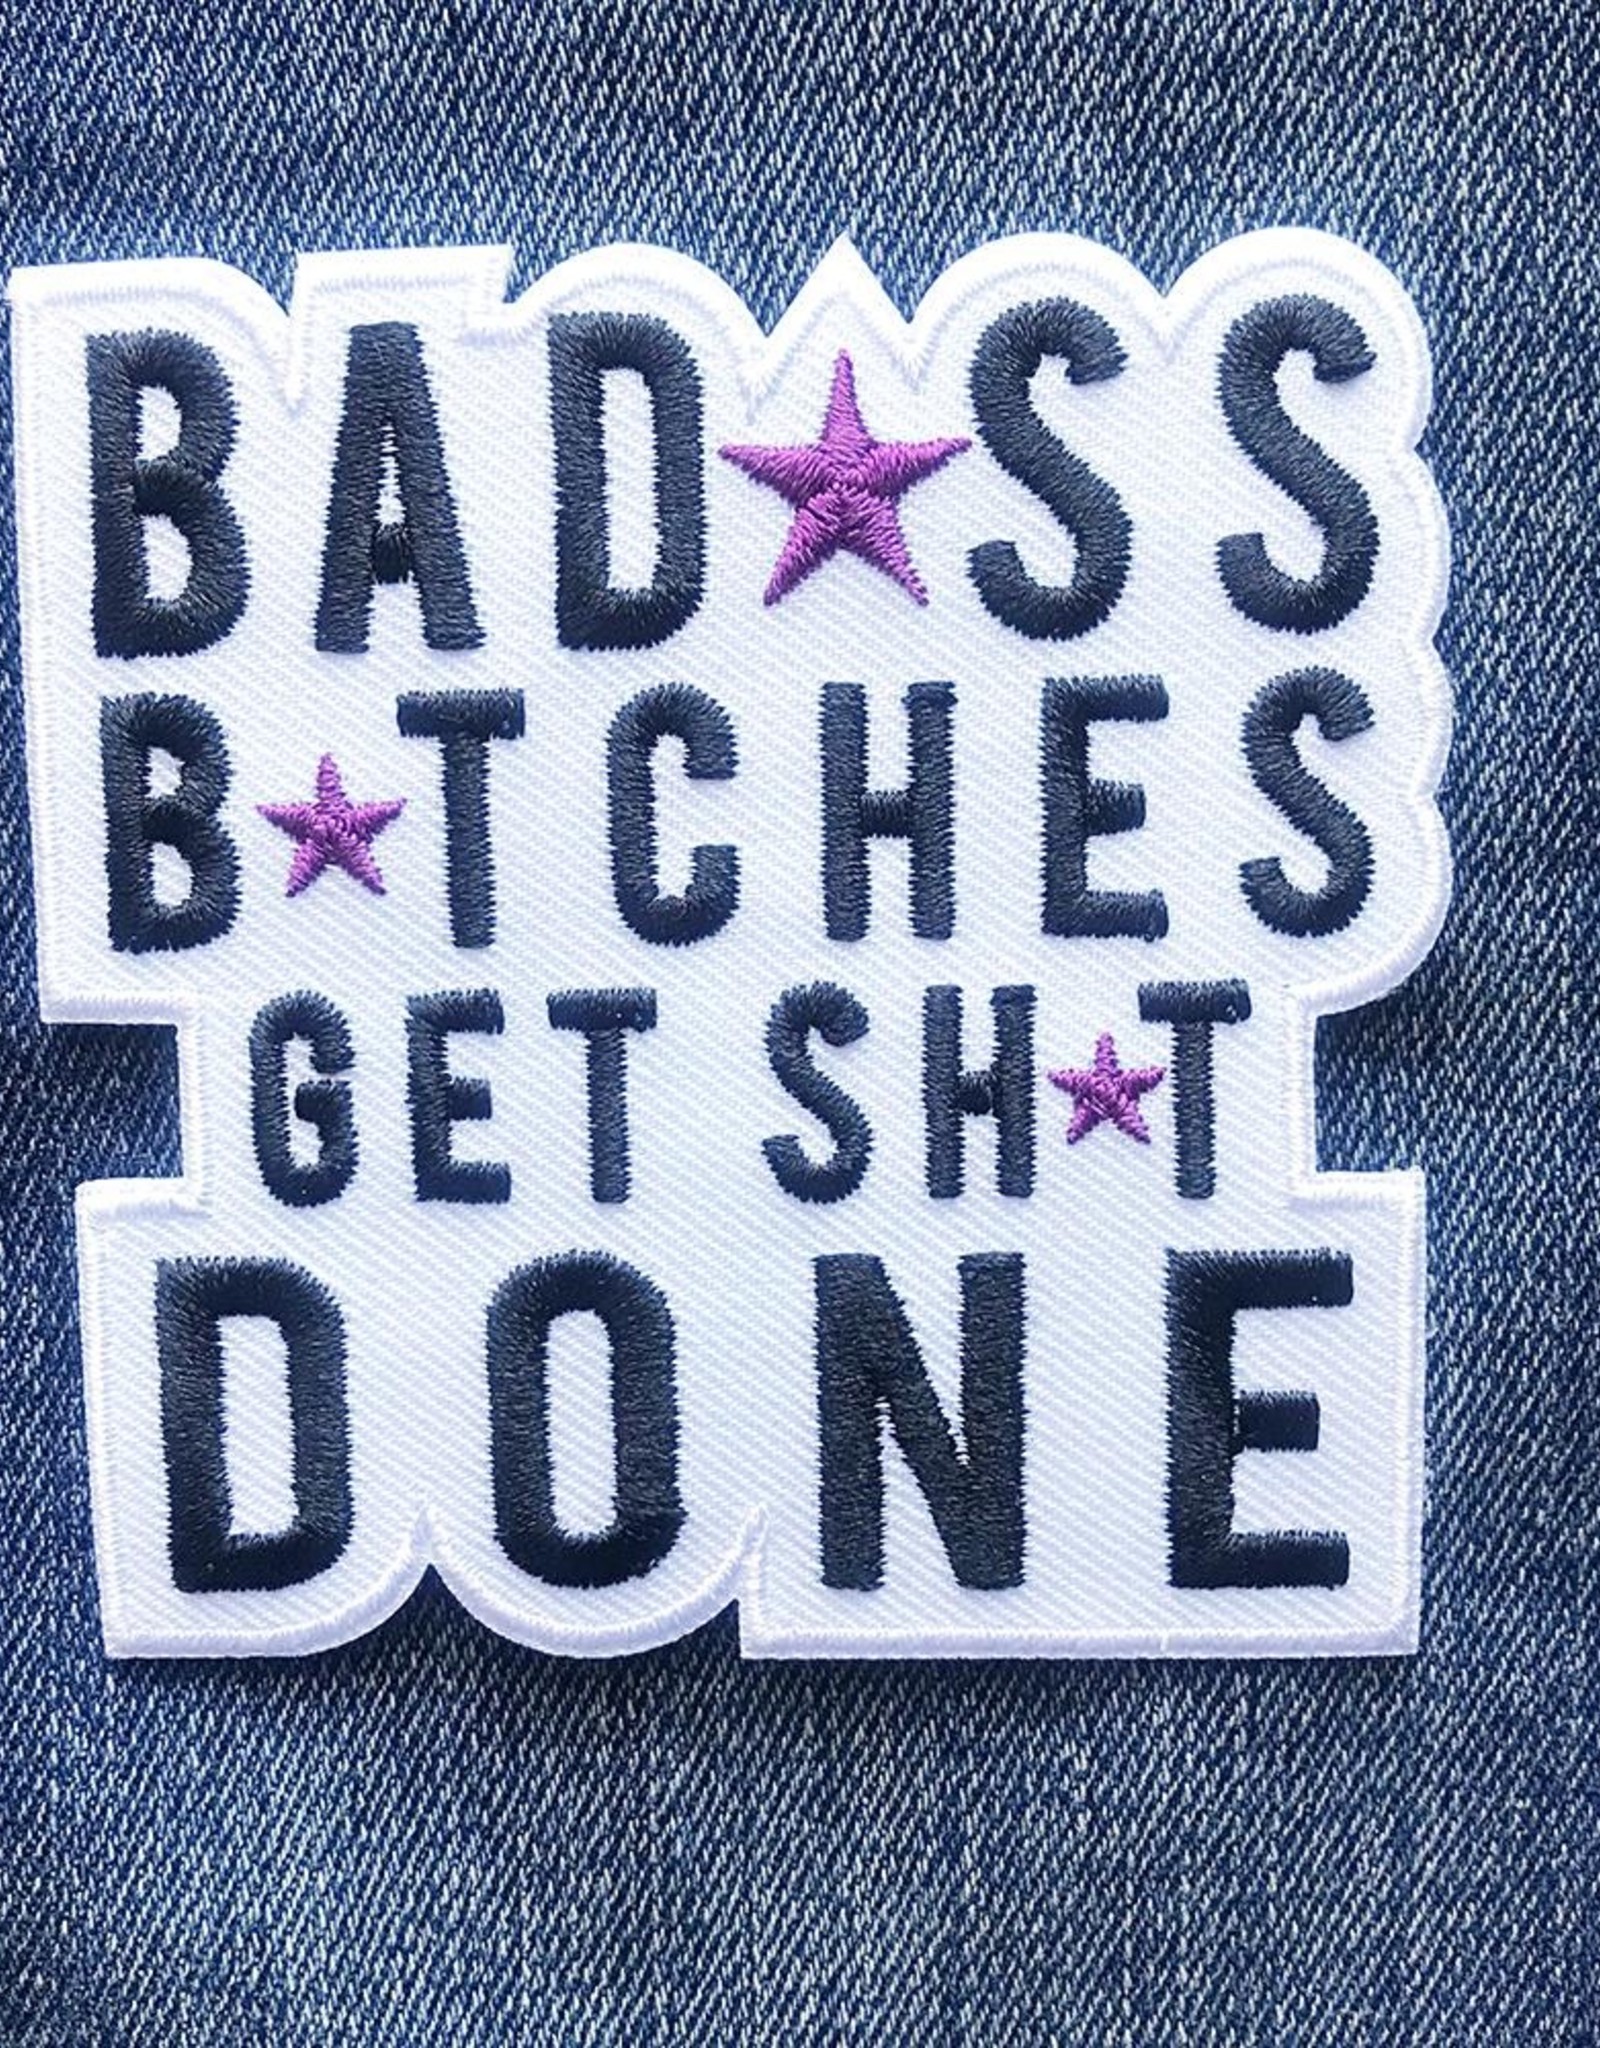 Steel Petal Press Patch - Bad Bitches Get Shit Done